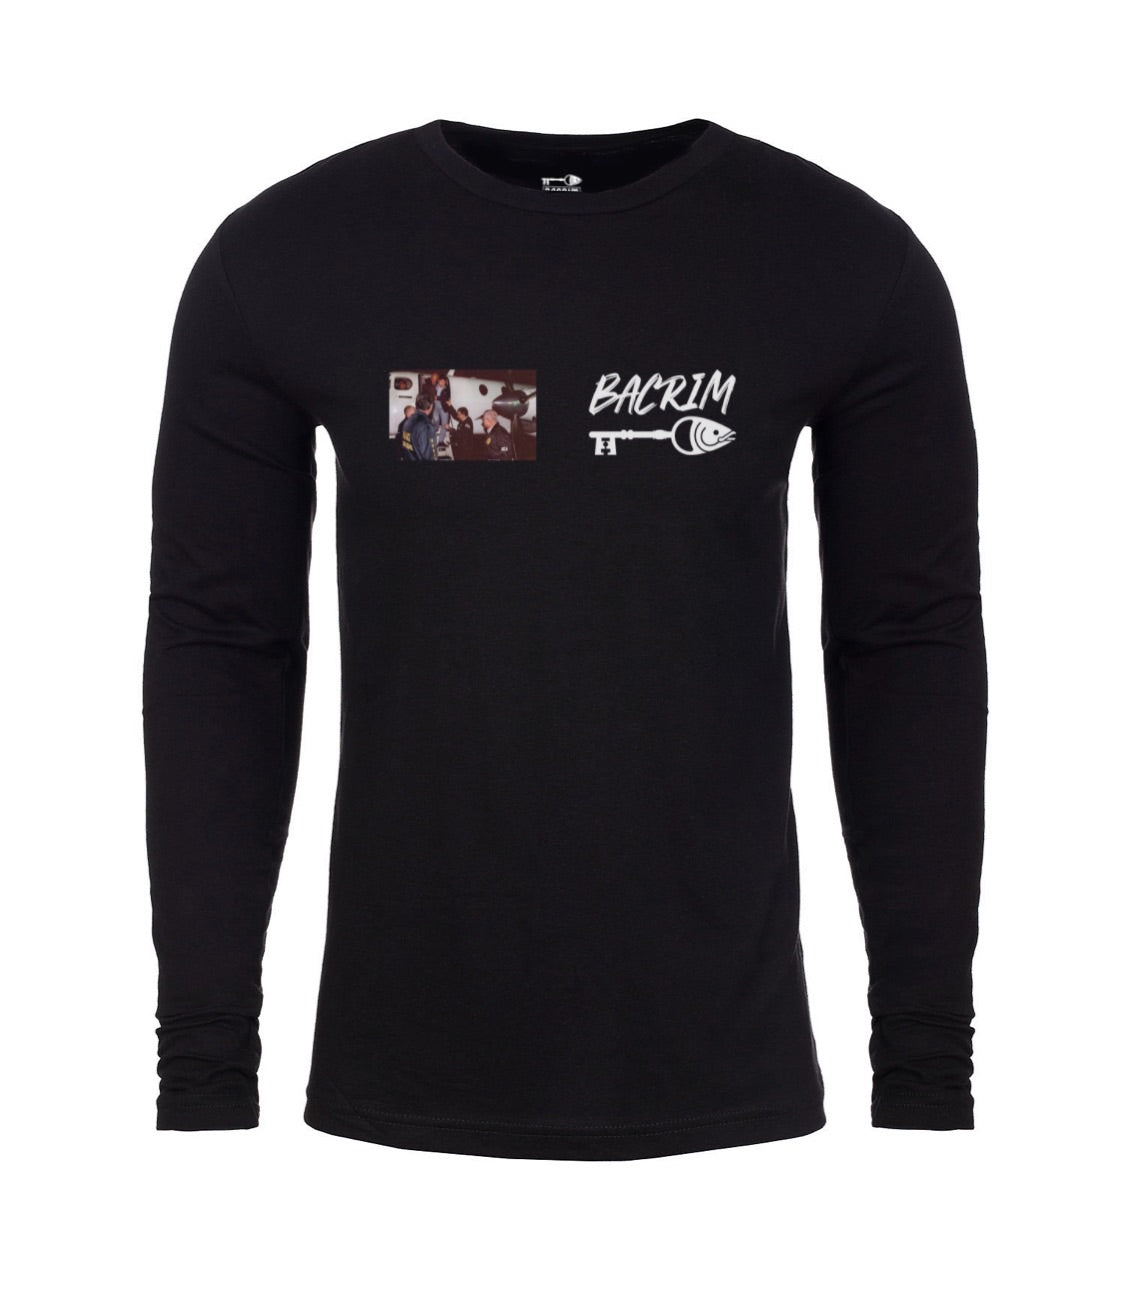 Extradition Tour Long Sleeve